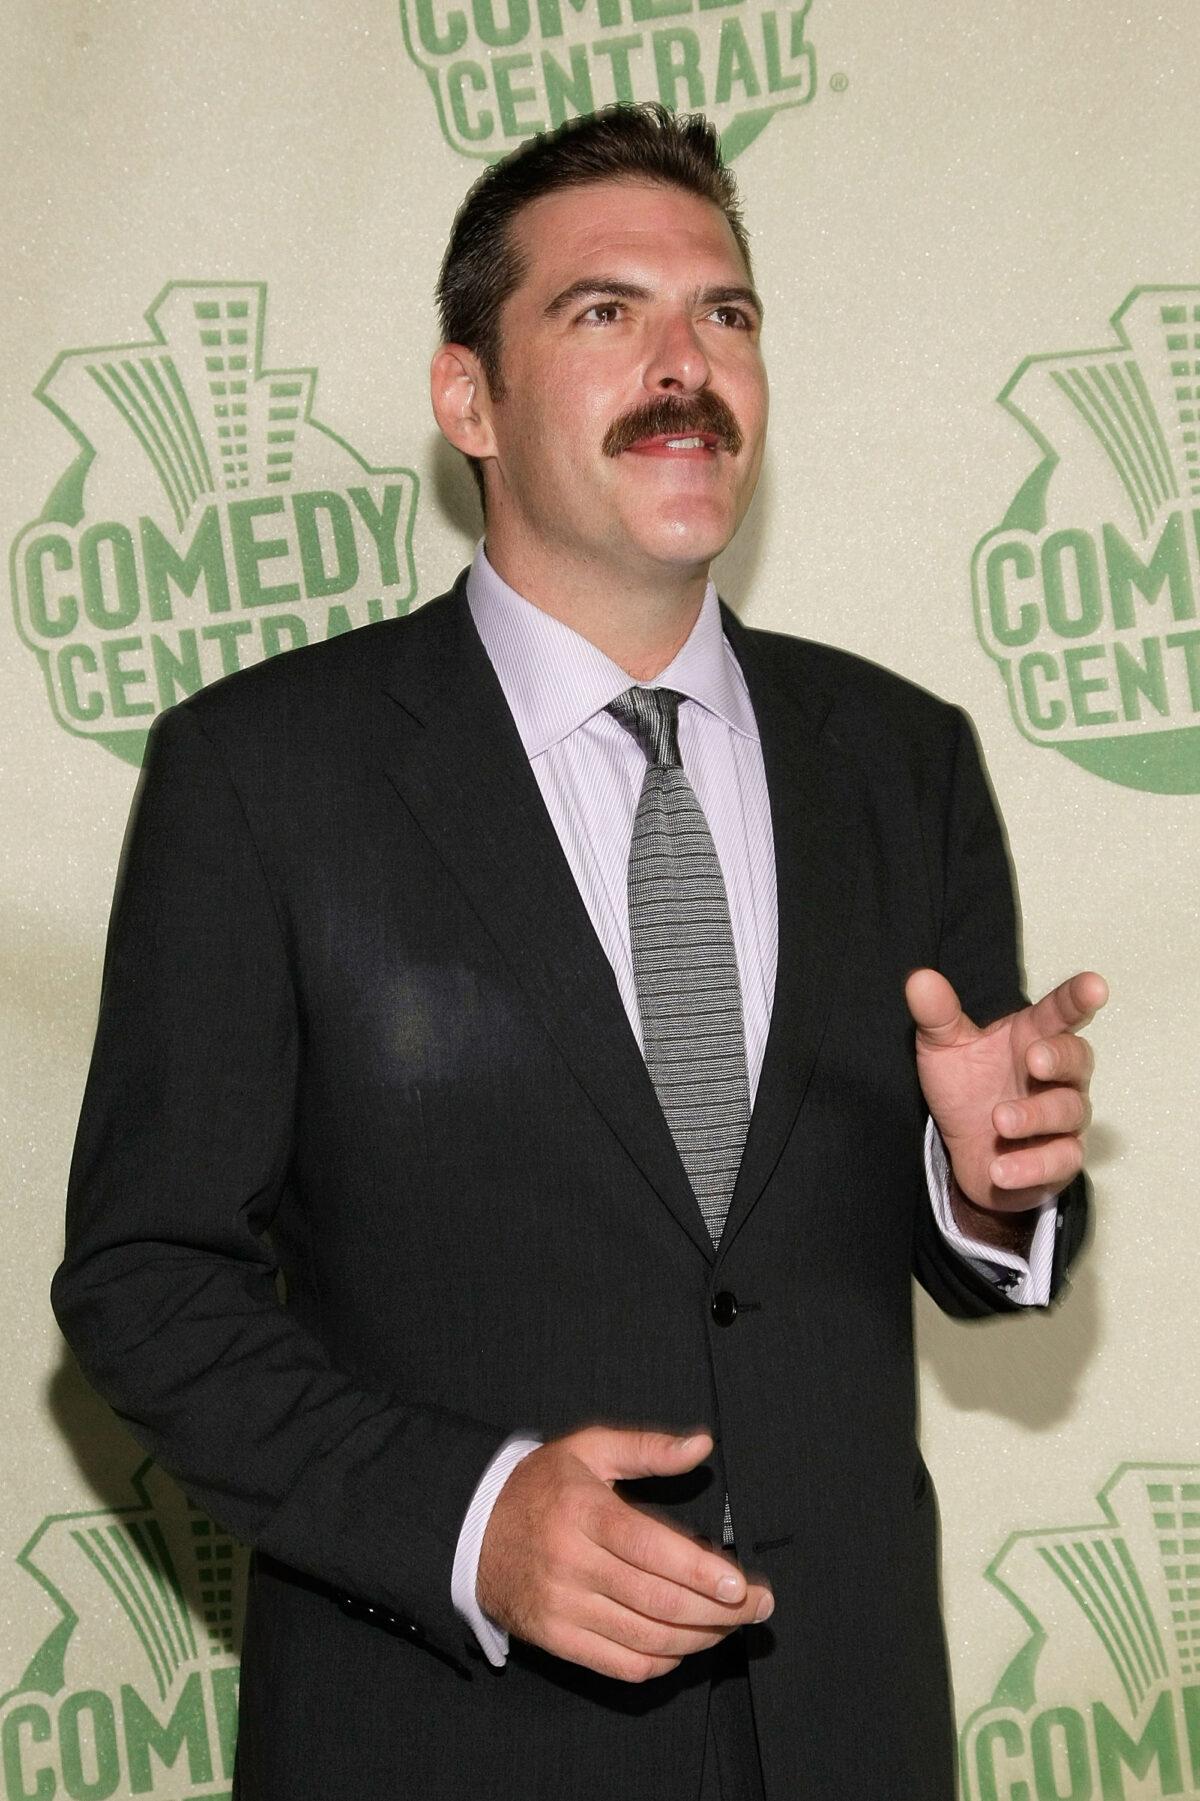 Jay Johnston attends the Comedy Central Emmy After Party at Falcon in Los Angeles, Calif., on Sept. 20, 2009. (Noel Vasquez/Getty Images)